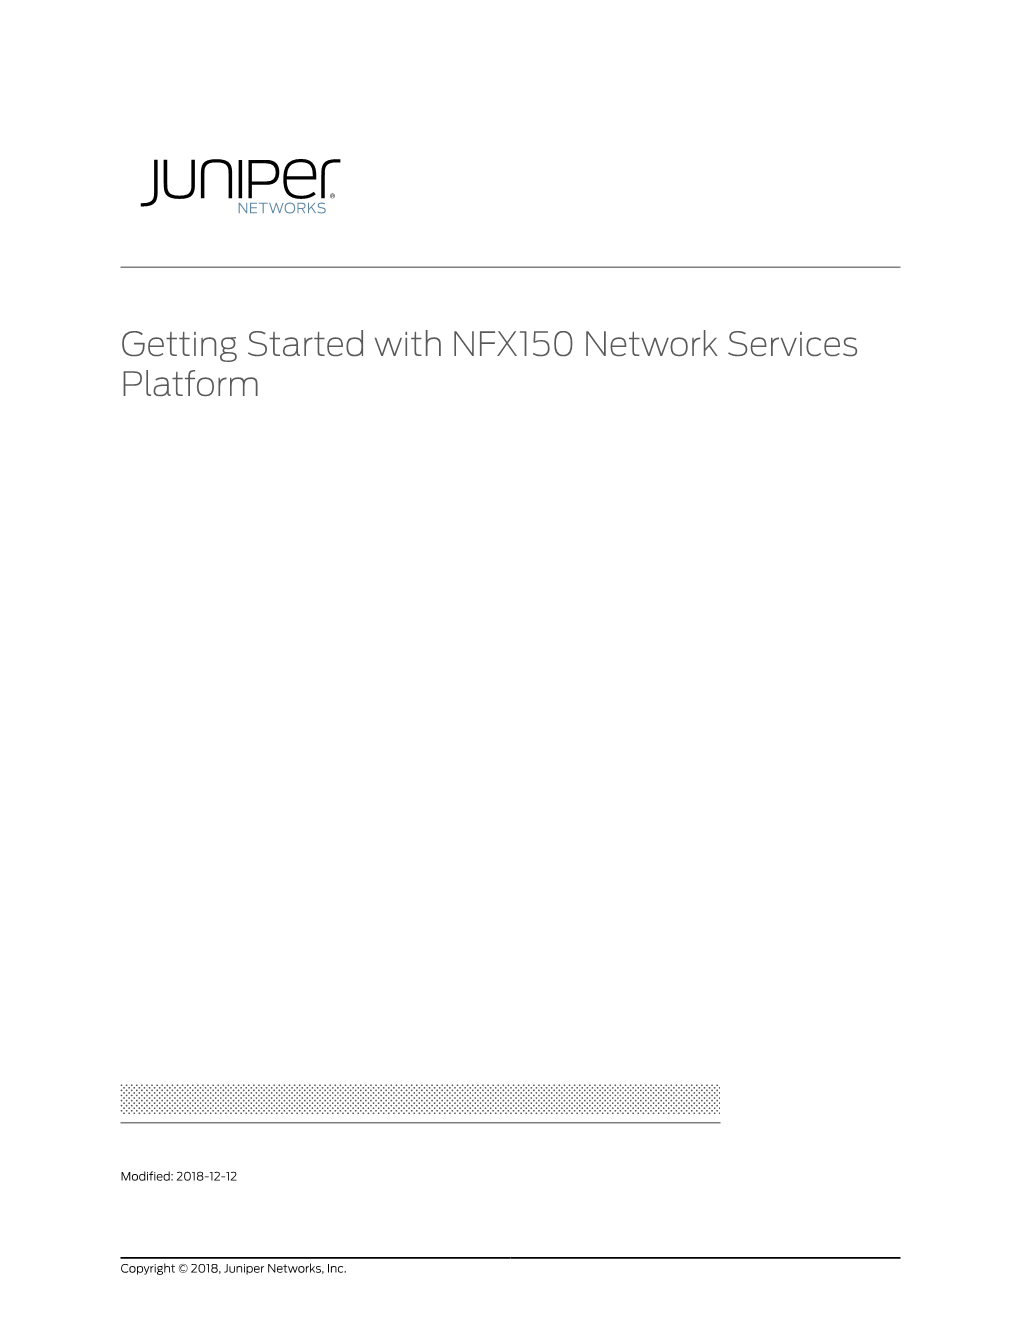 Getting Started with NFX150 Network Services Platform